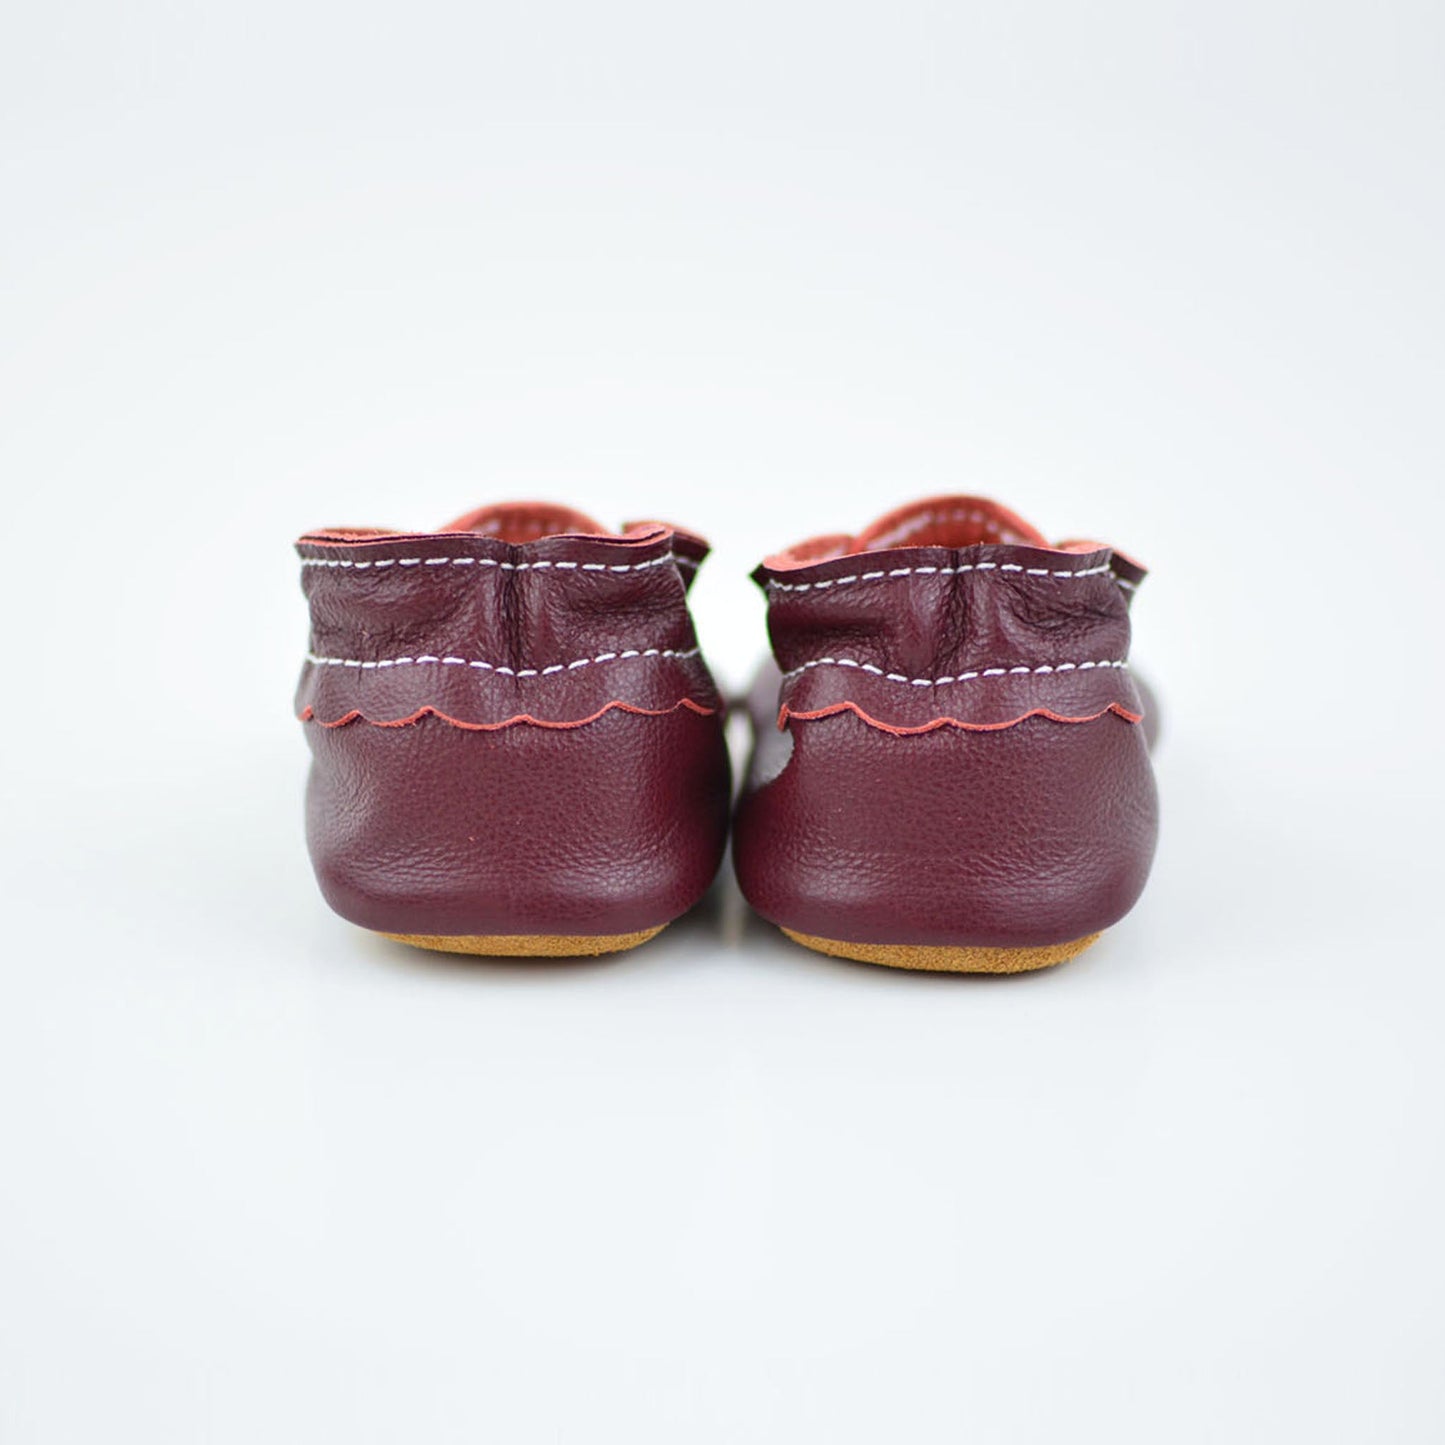 RTS Burgundy T-straps With Tan Suede Leather Soles - Size 3 (12-18M)(5")